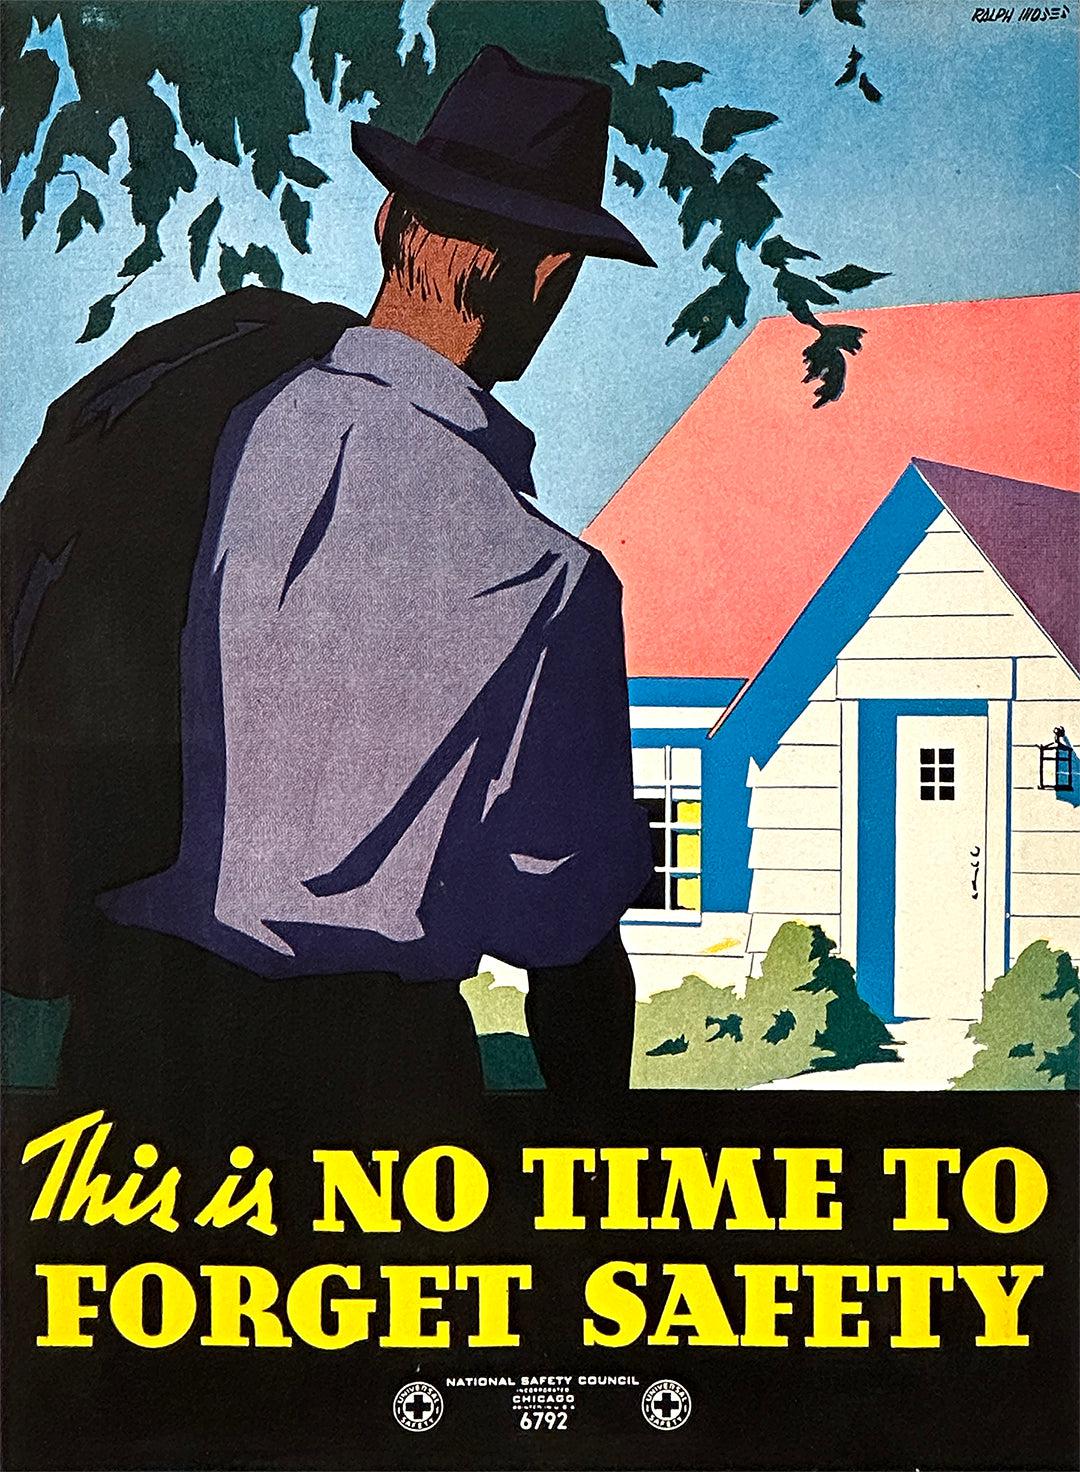 Original Vintage This is No Time to Forget Safety WWII Poster by Ralph Moses c1943